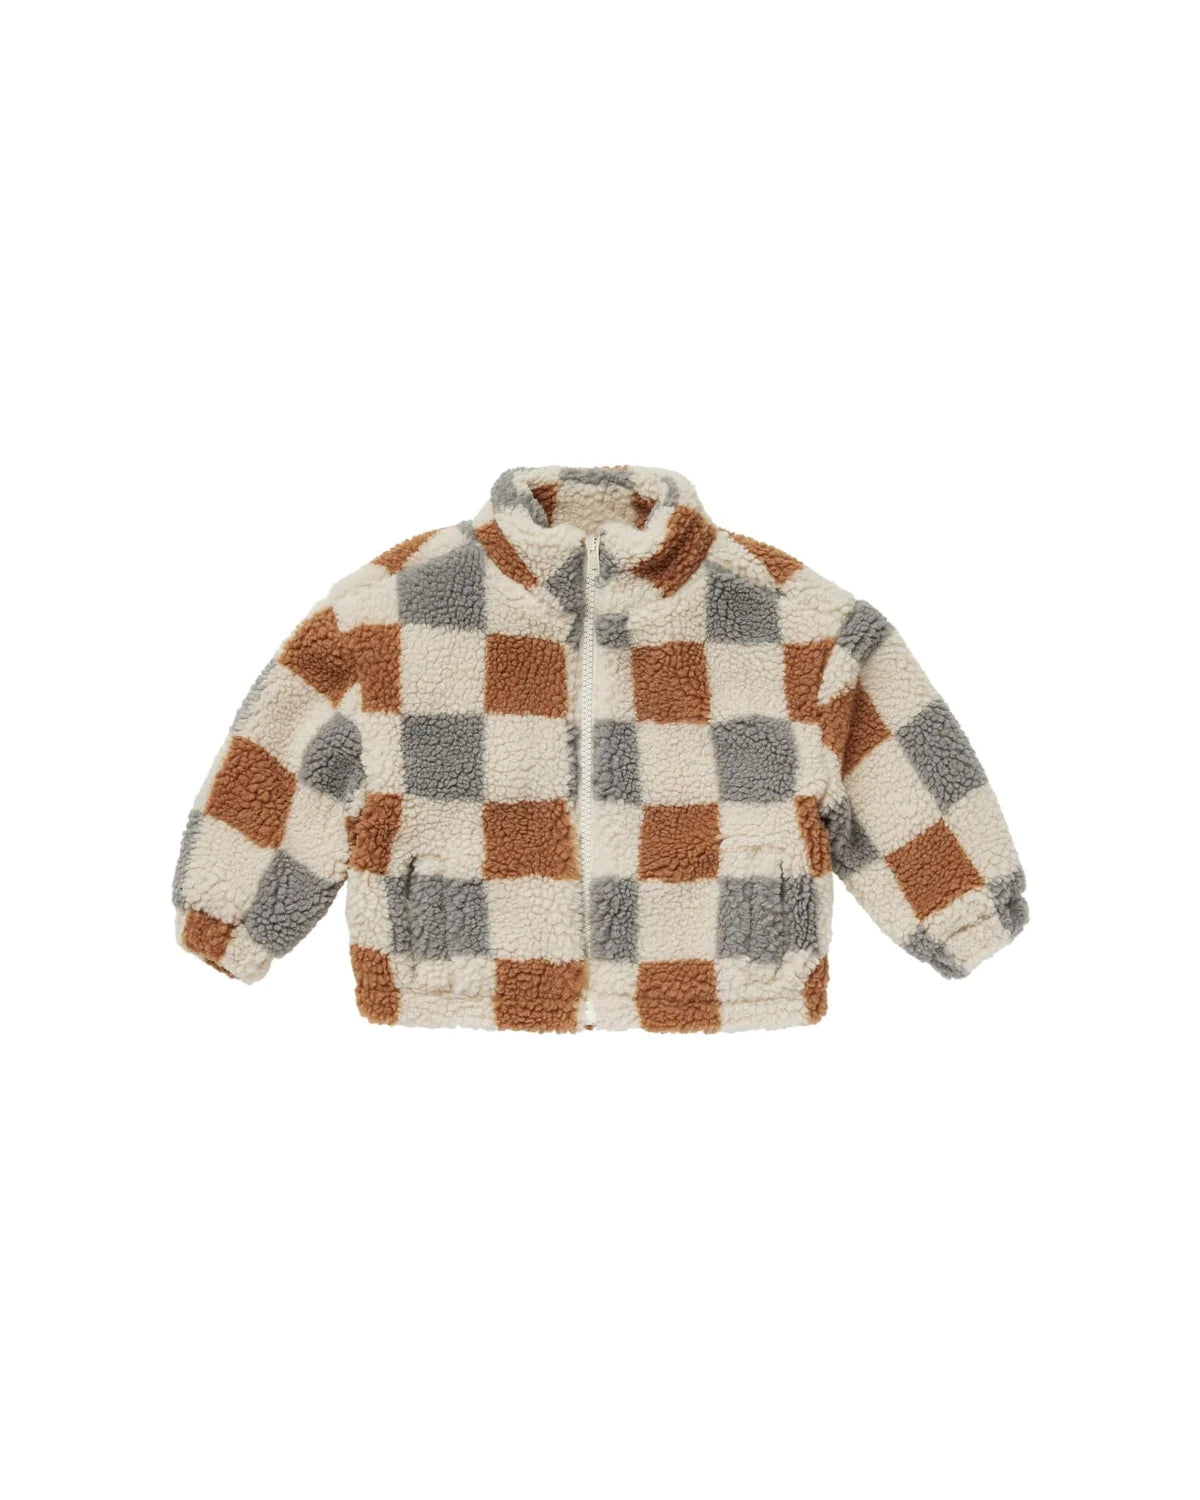 Coco Jacket in Shearling Check